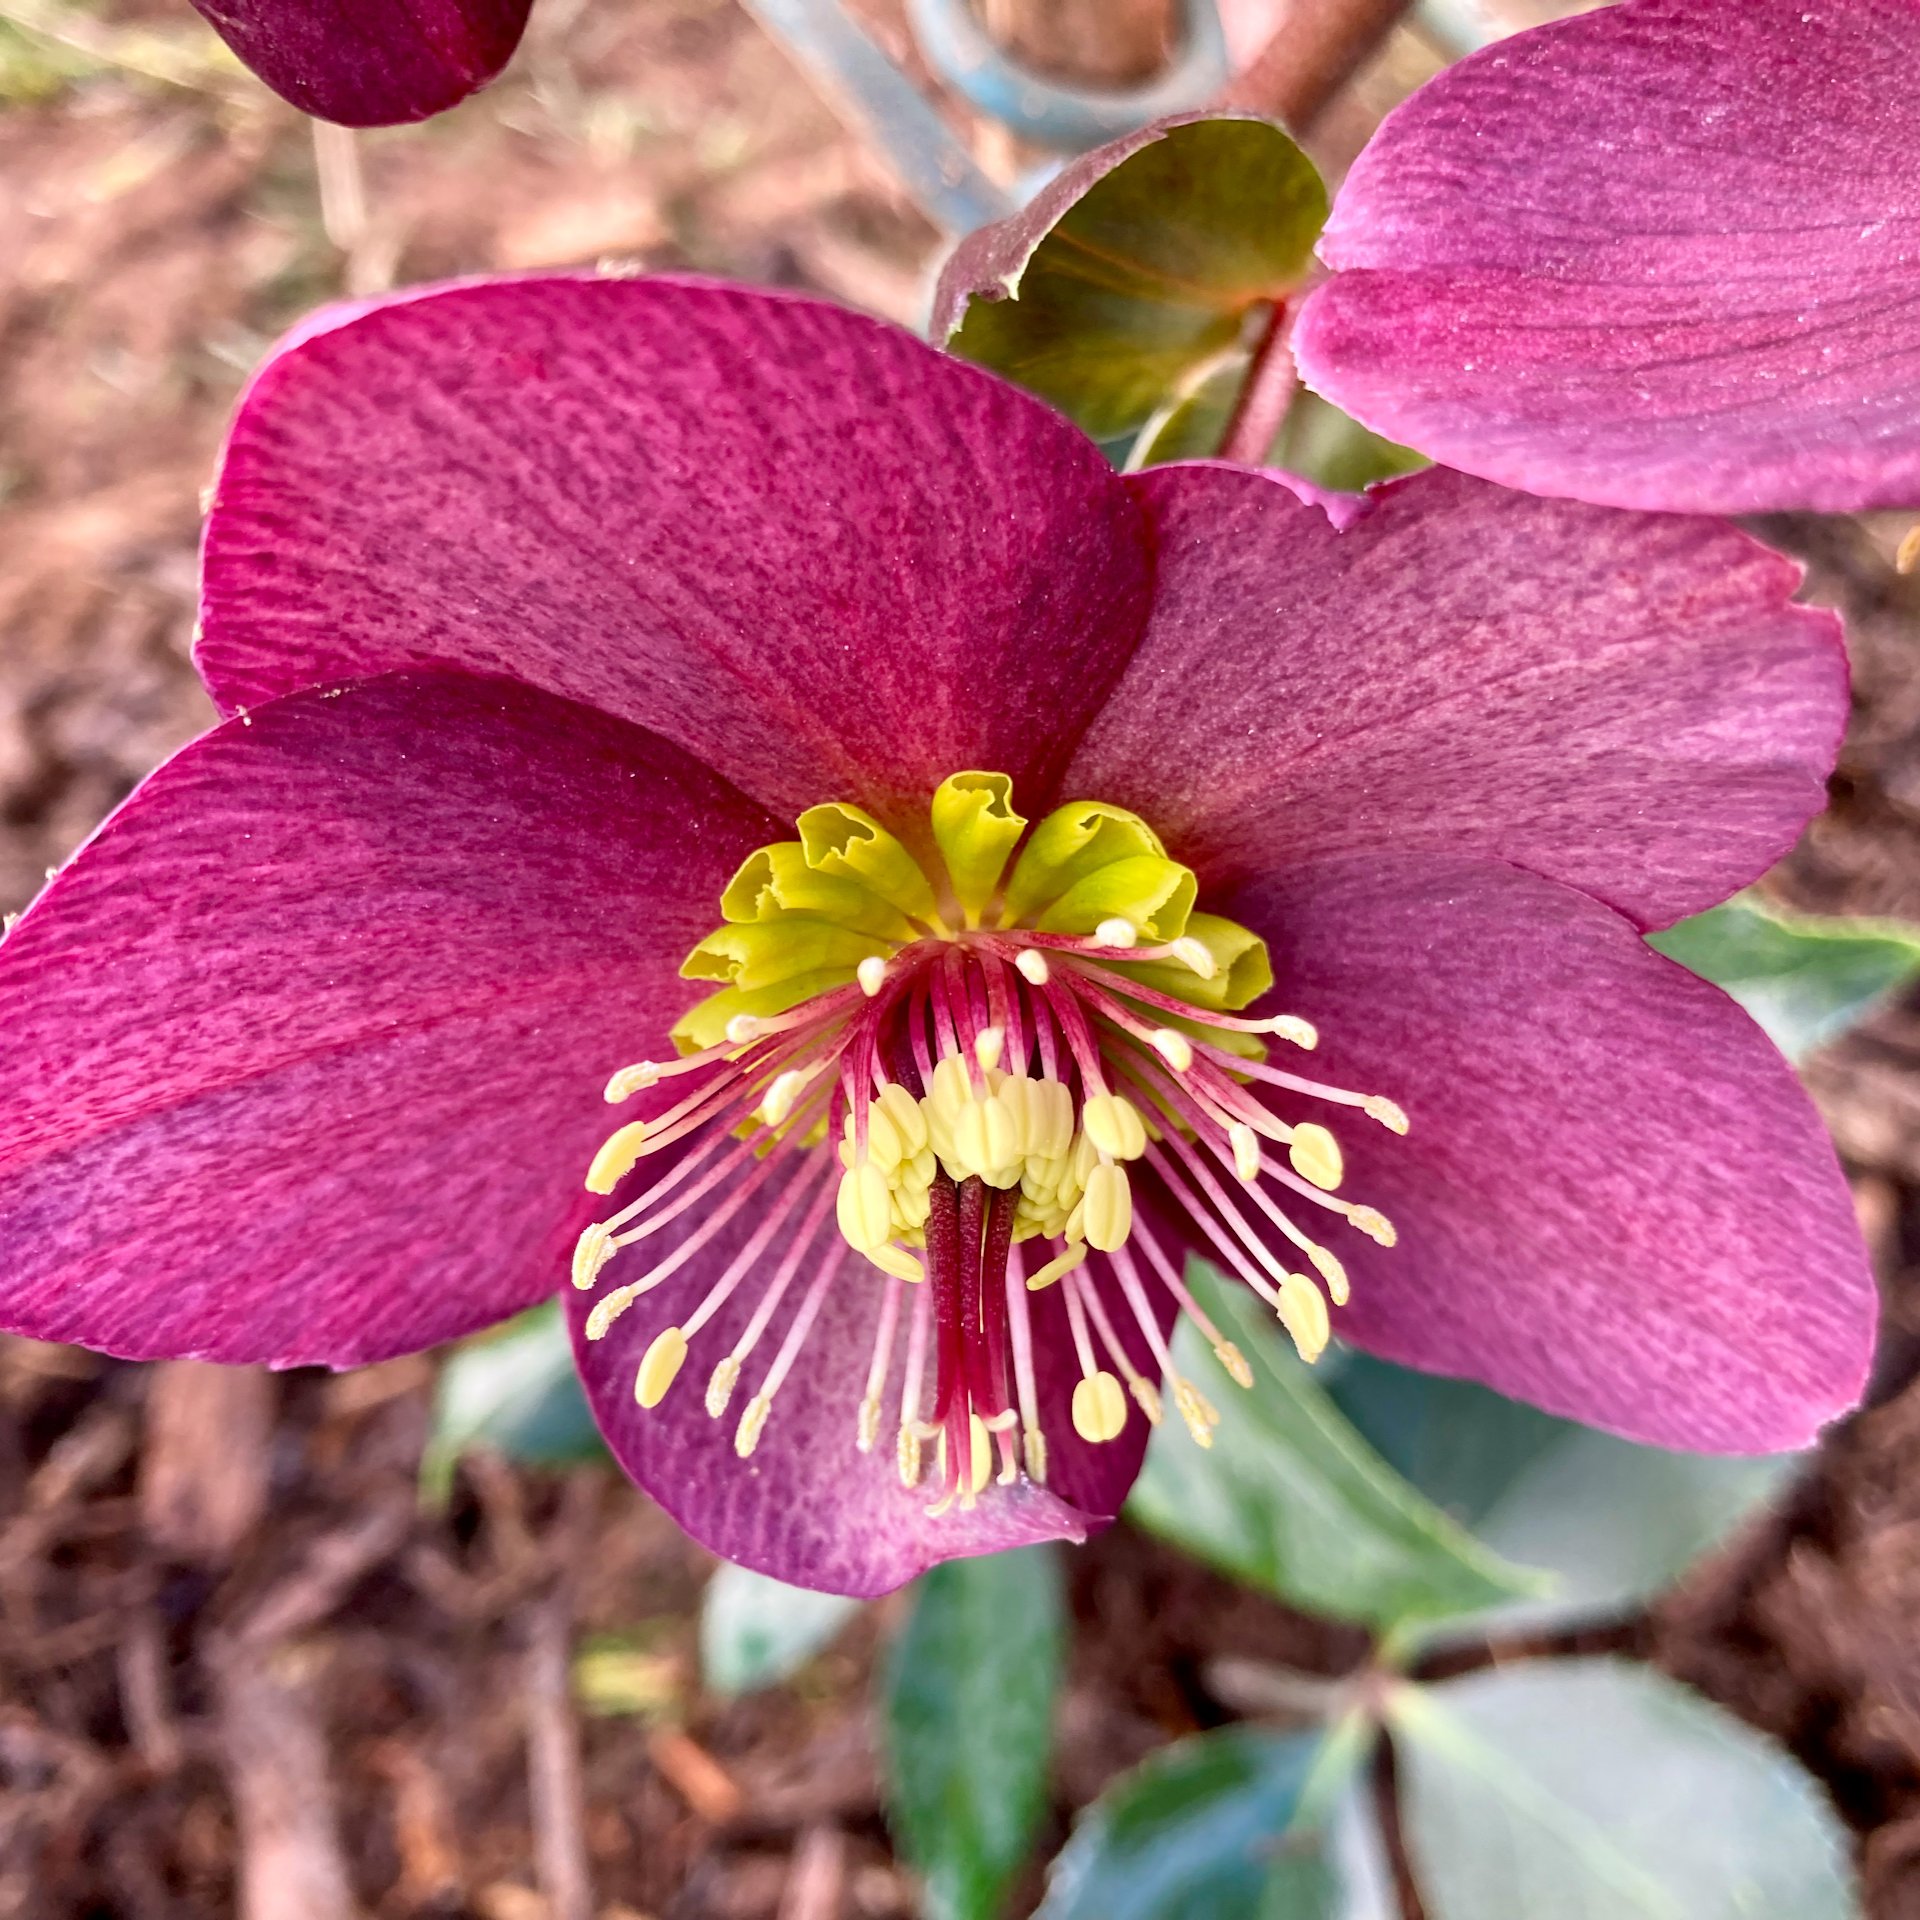  Justine planted some Hellebores, which provide interesting colour and flowers in the winter. 